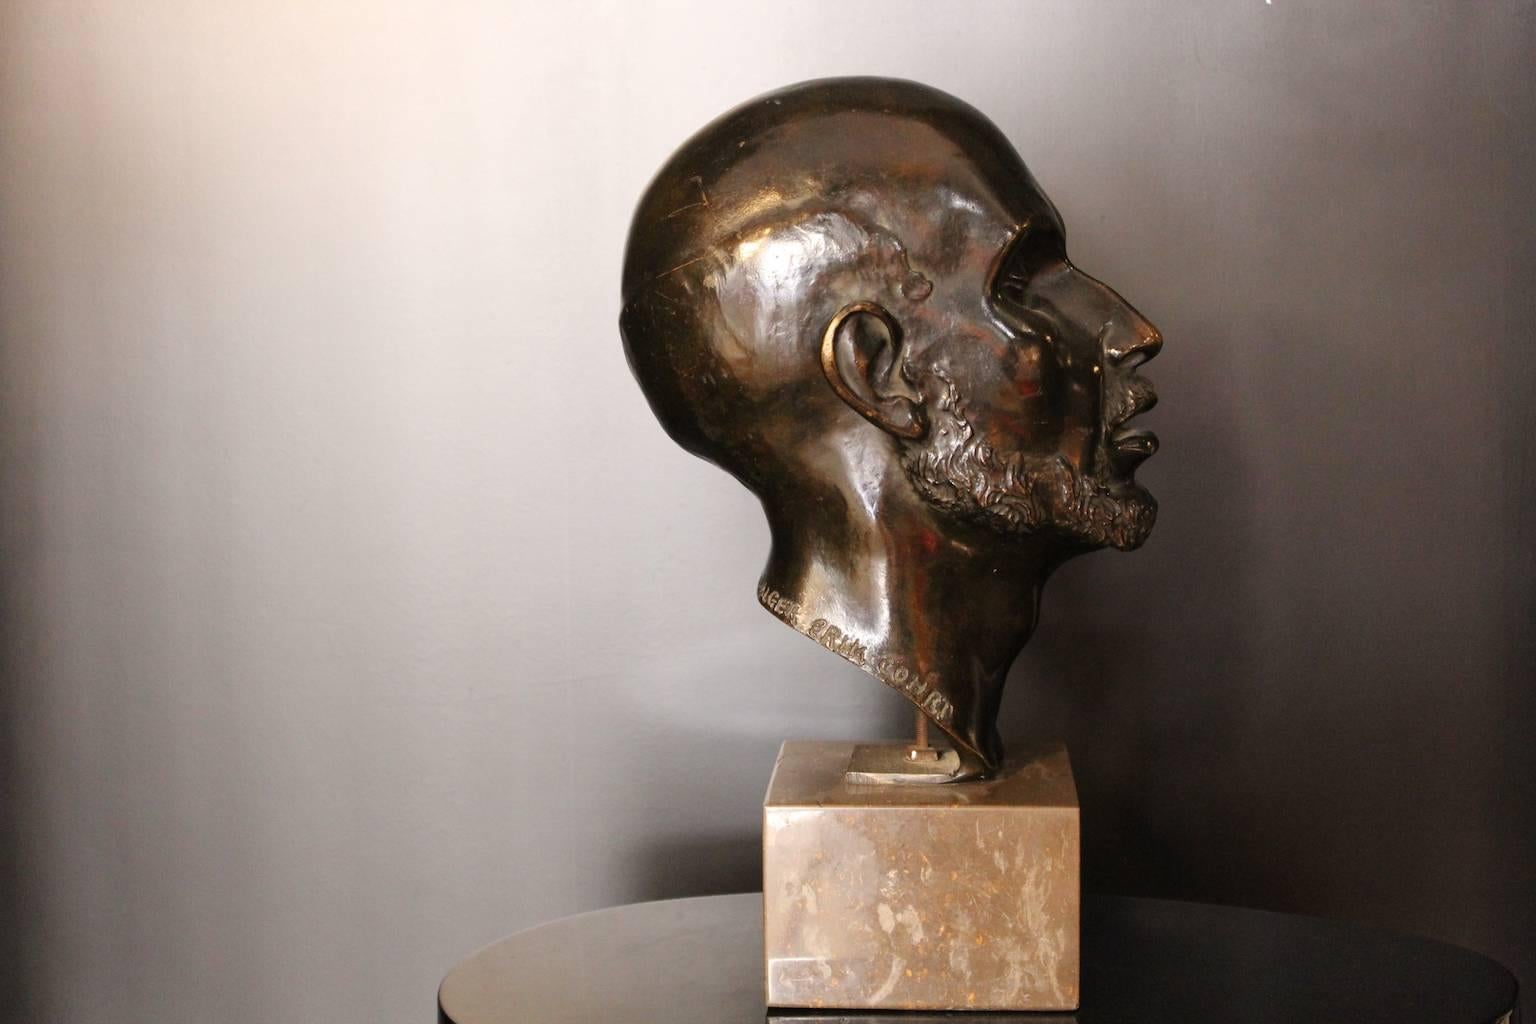 1920 head by Erik Cohort bronze sculpture a marble base (lost wax casting by Meroni and Radice foundry France).
Erik Cohrt (Denmark, 1902-70) studied at the Academy Reale in Rome, lived in Algiers
for many years and is known for his sandstone